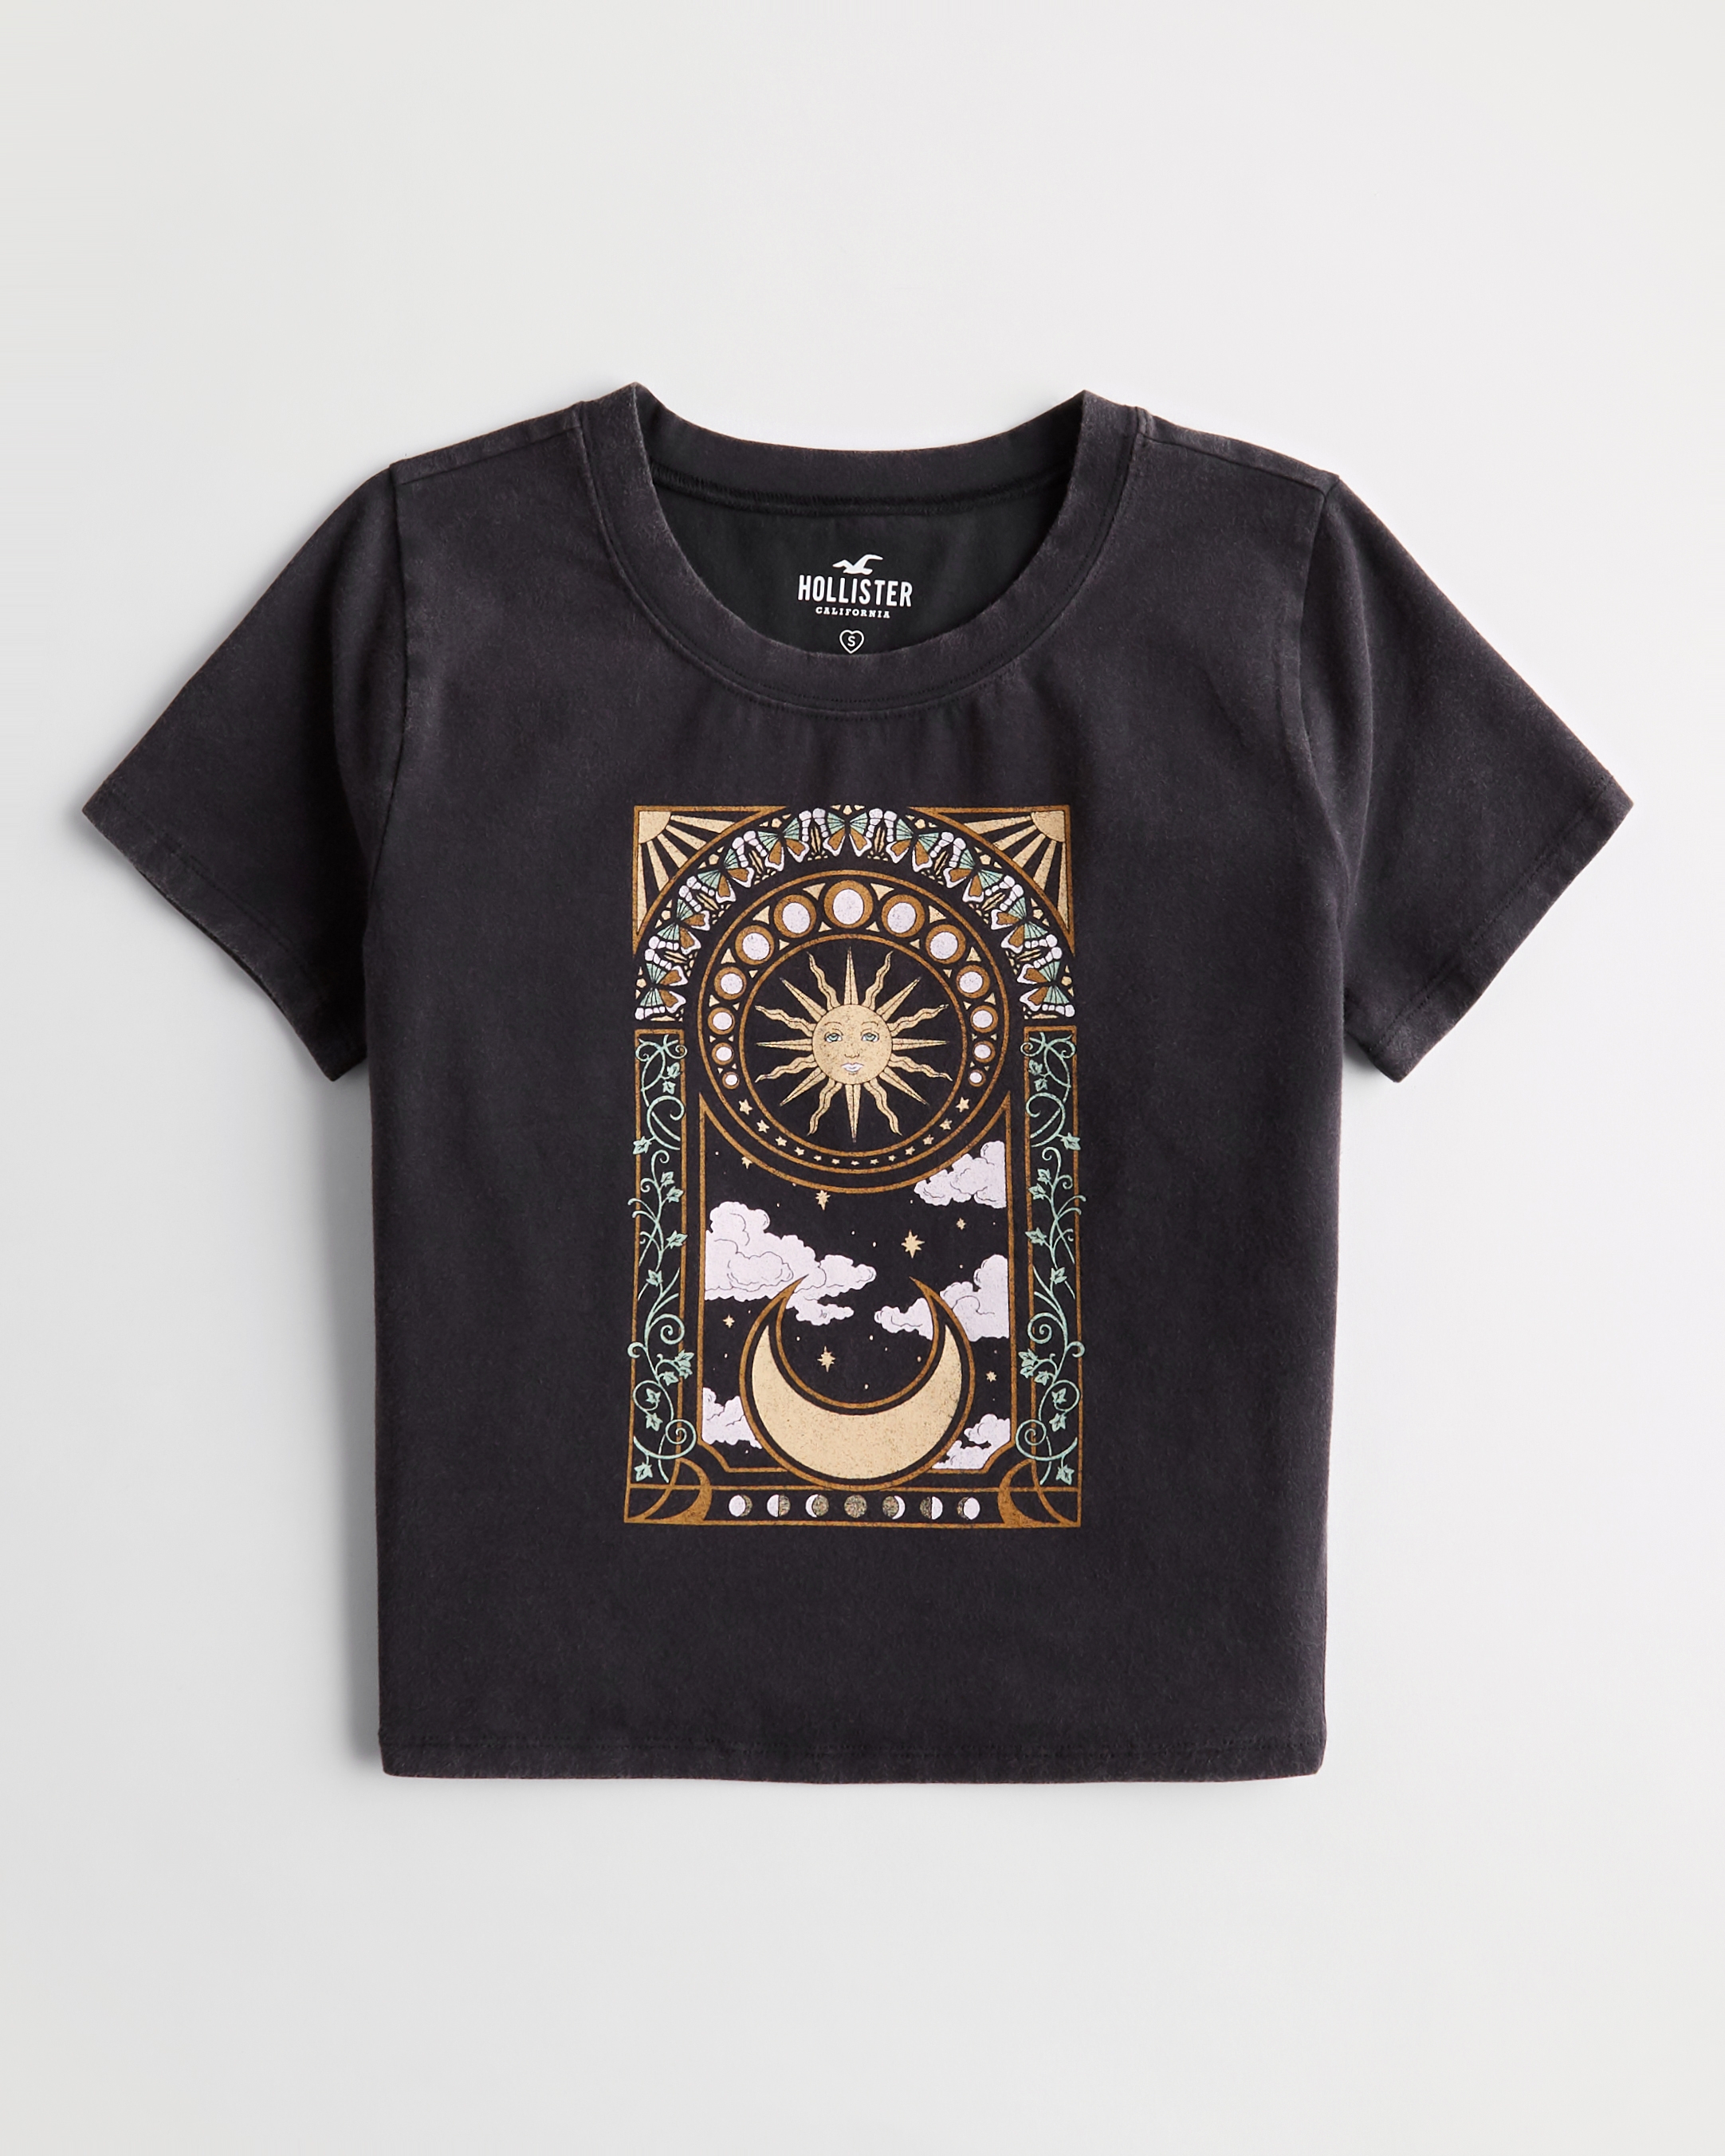 Hollister Print Graphic Baby Tee